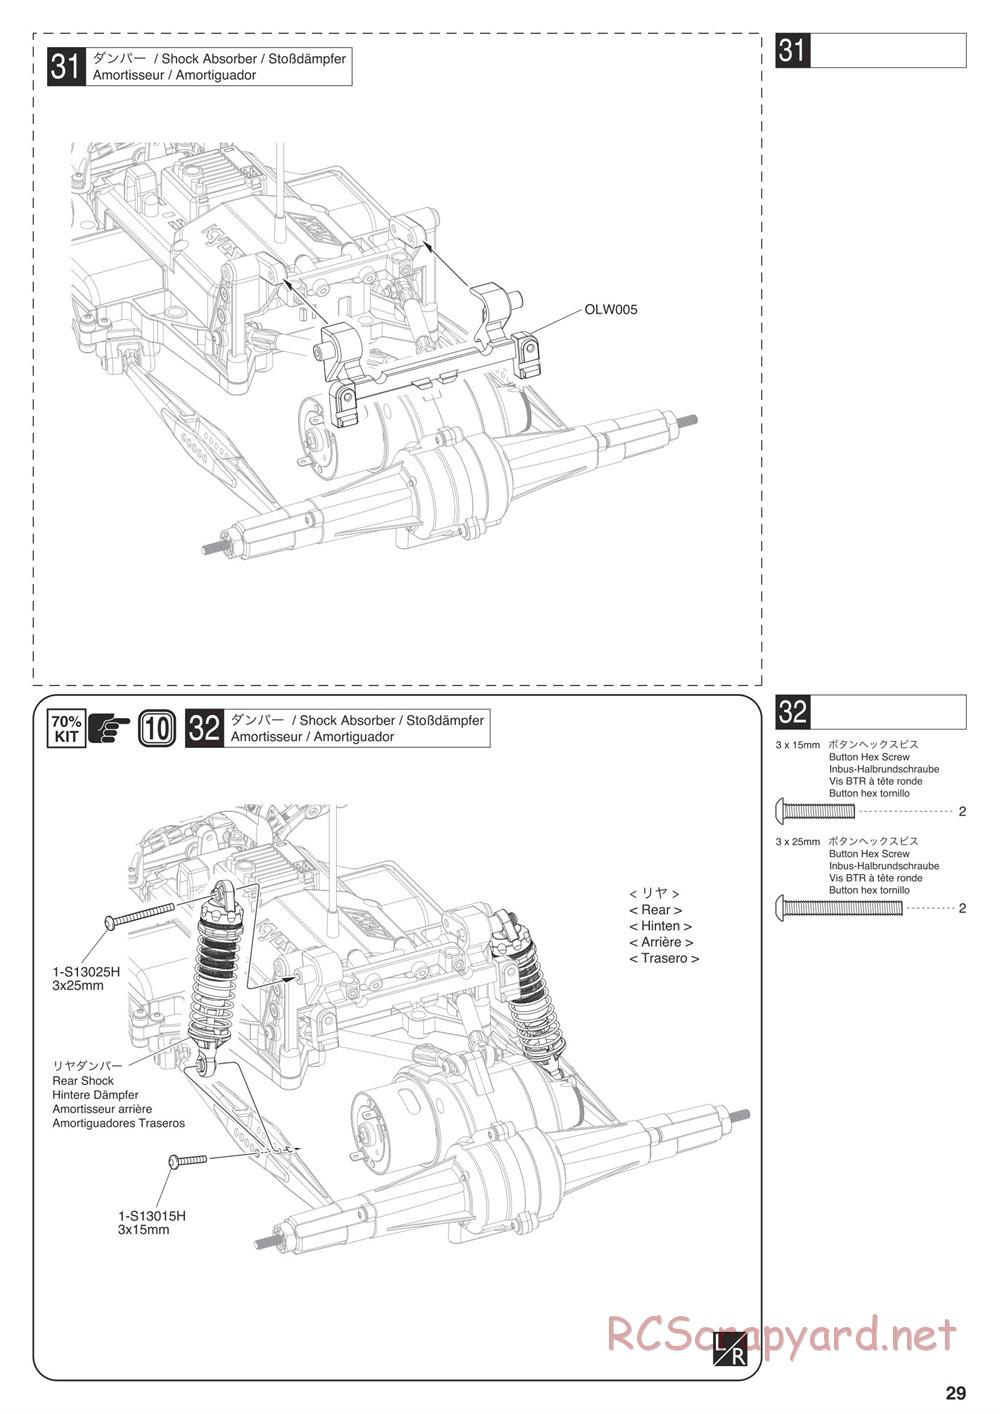 Kyosho - Outlaw Rampage Pro - Manual - Page 29